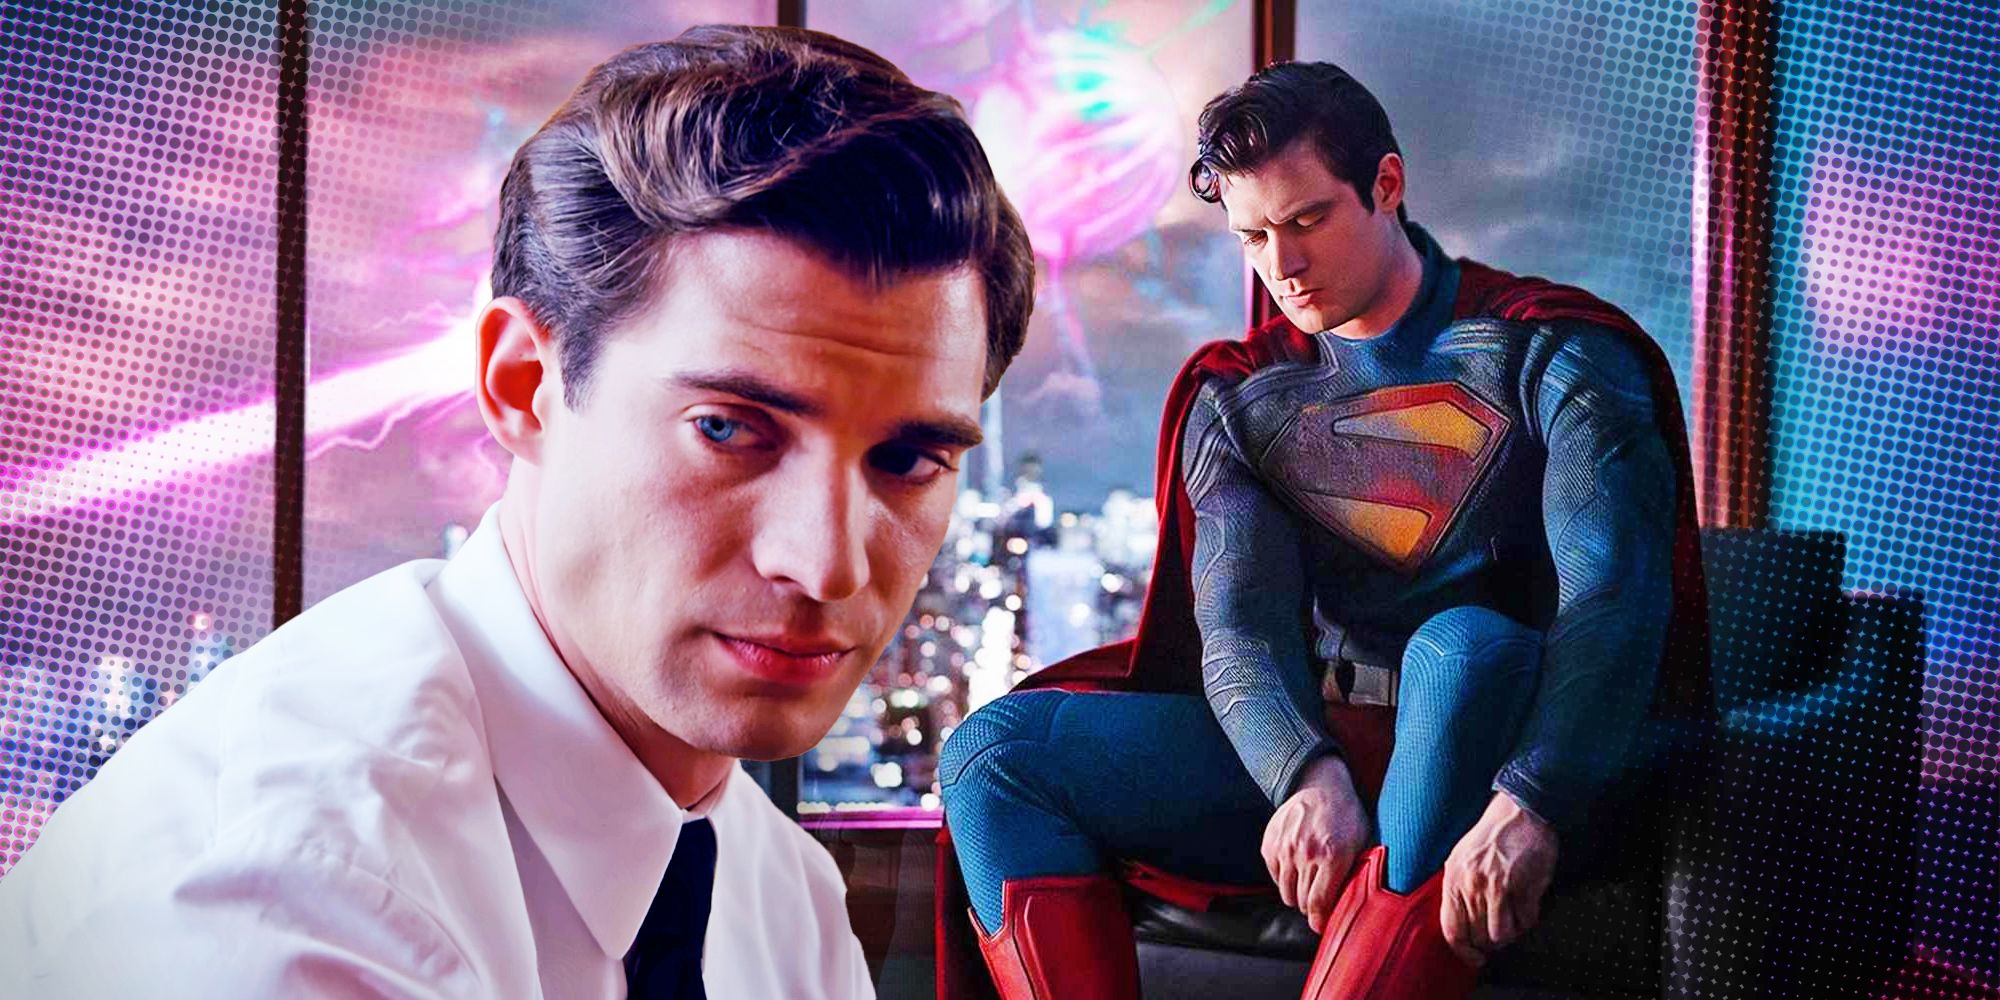 Headshot of David Corenswet next to himself as the new DCEU Superman putting on his red boots with a pink explosion in the sky in the background